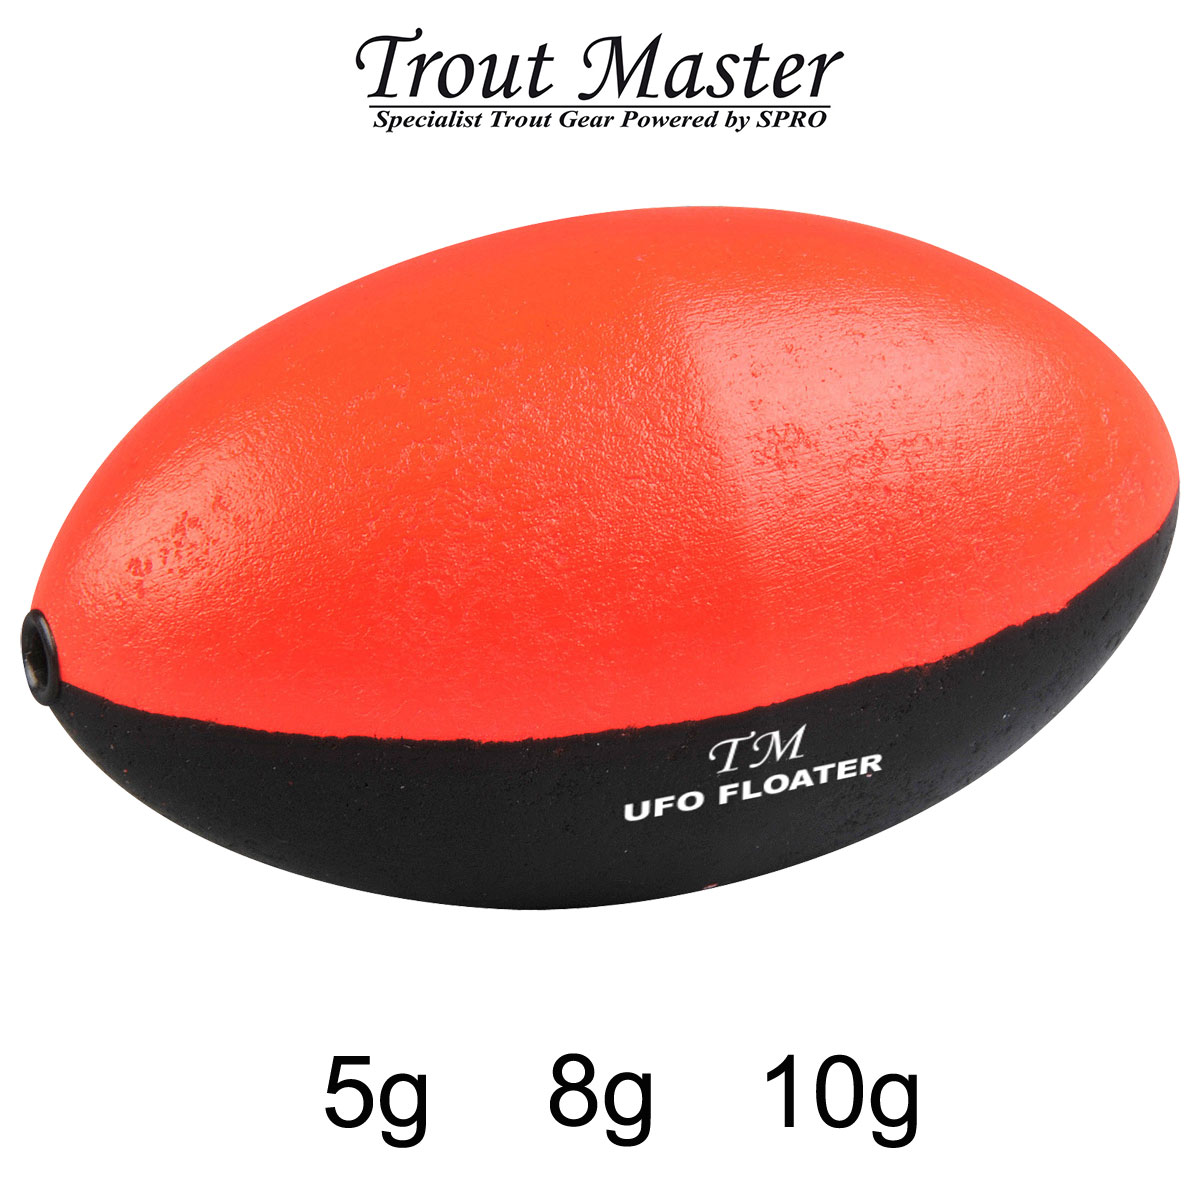 SPRO - Trout Master UFO Float Forellenpose